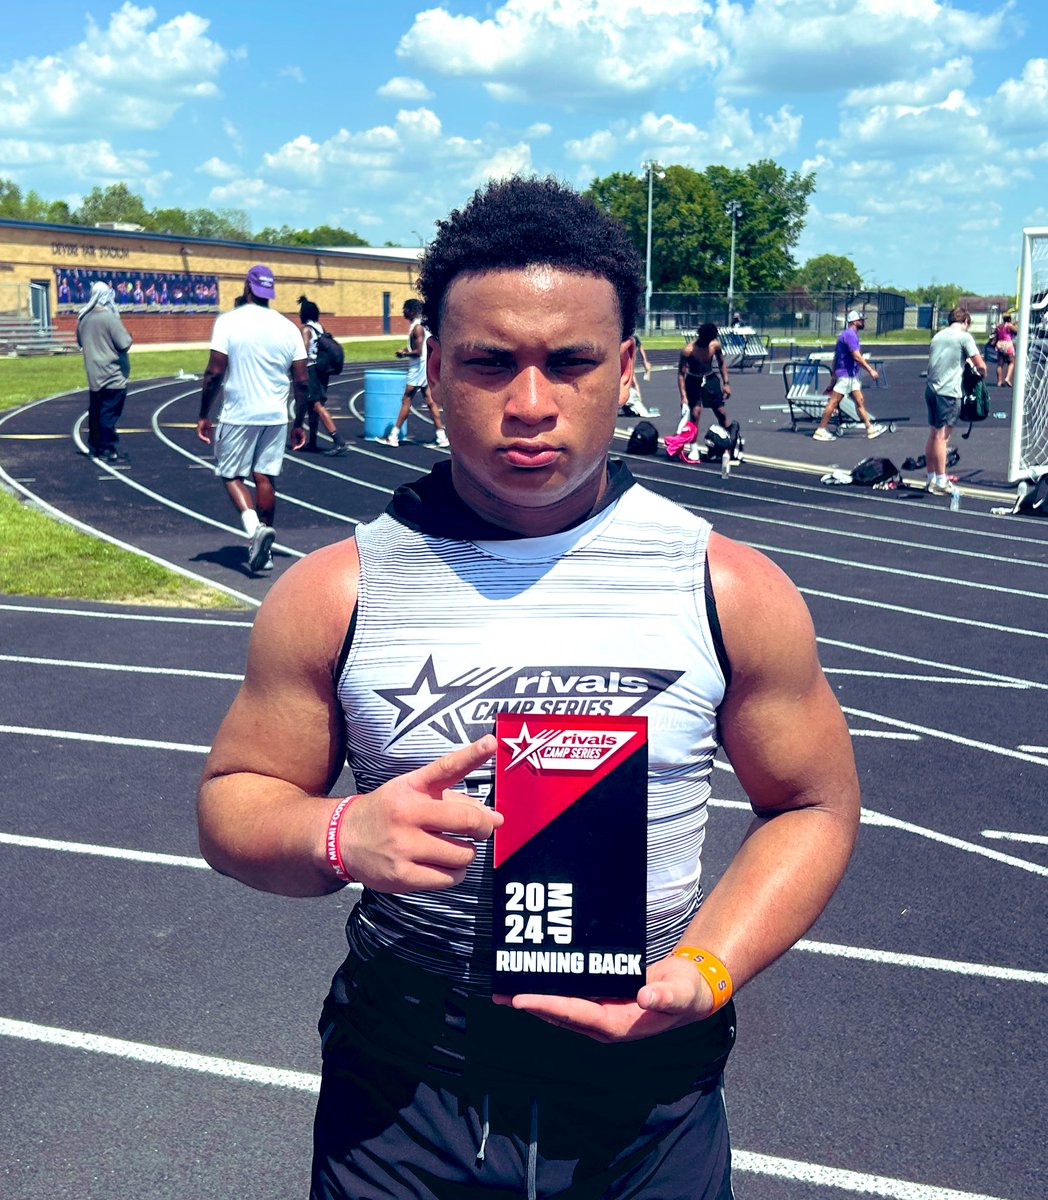 @RivalsCamp RB MVP thanks for the opportunity to compete @Rivals @GregSmithRivals @CoachLyonsCVfb